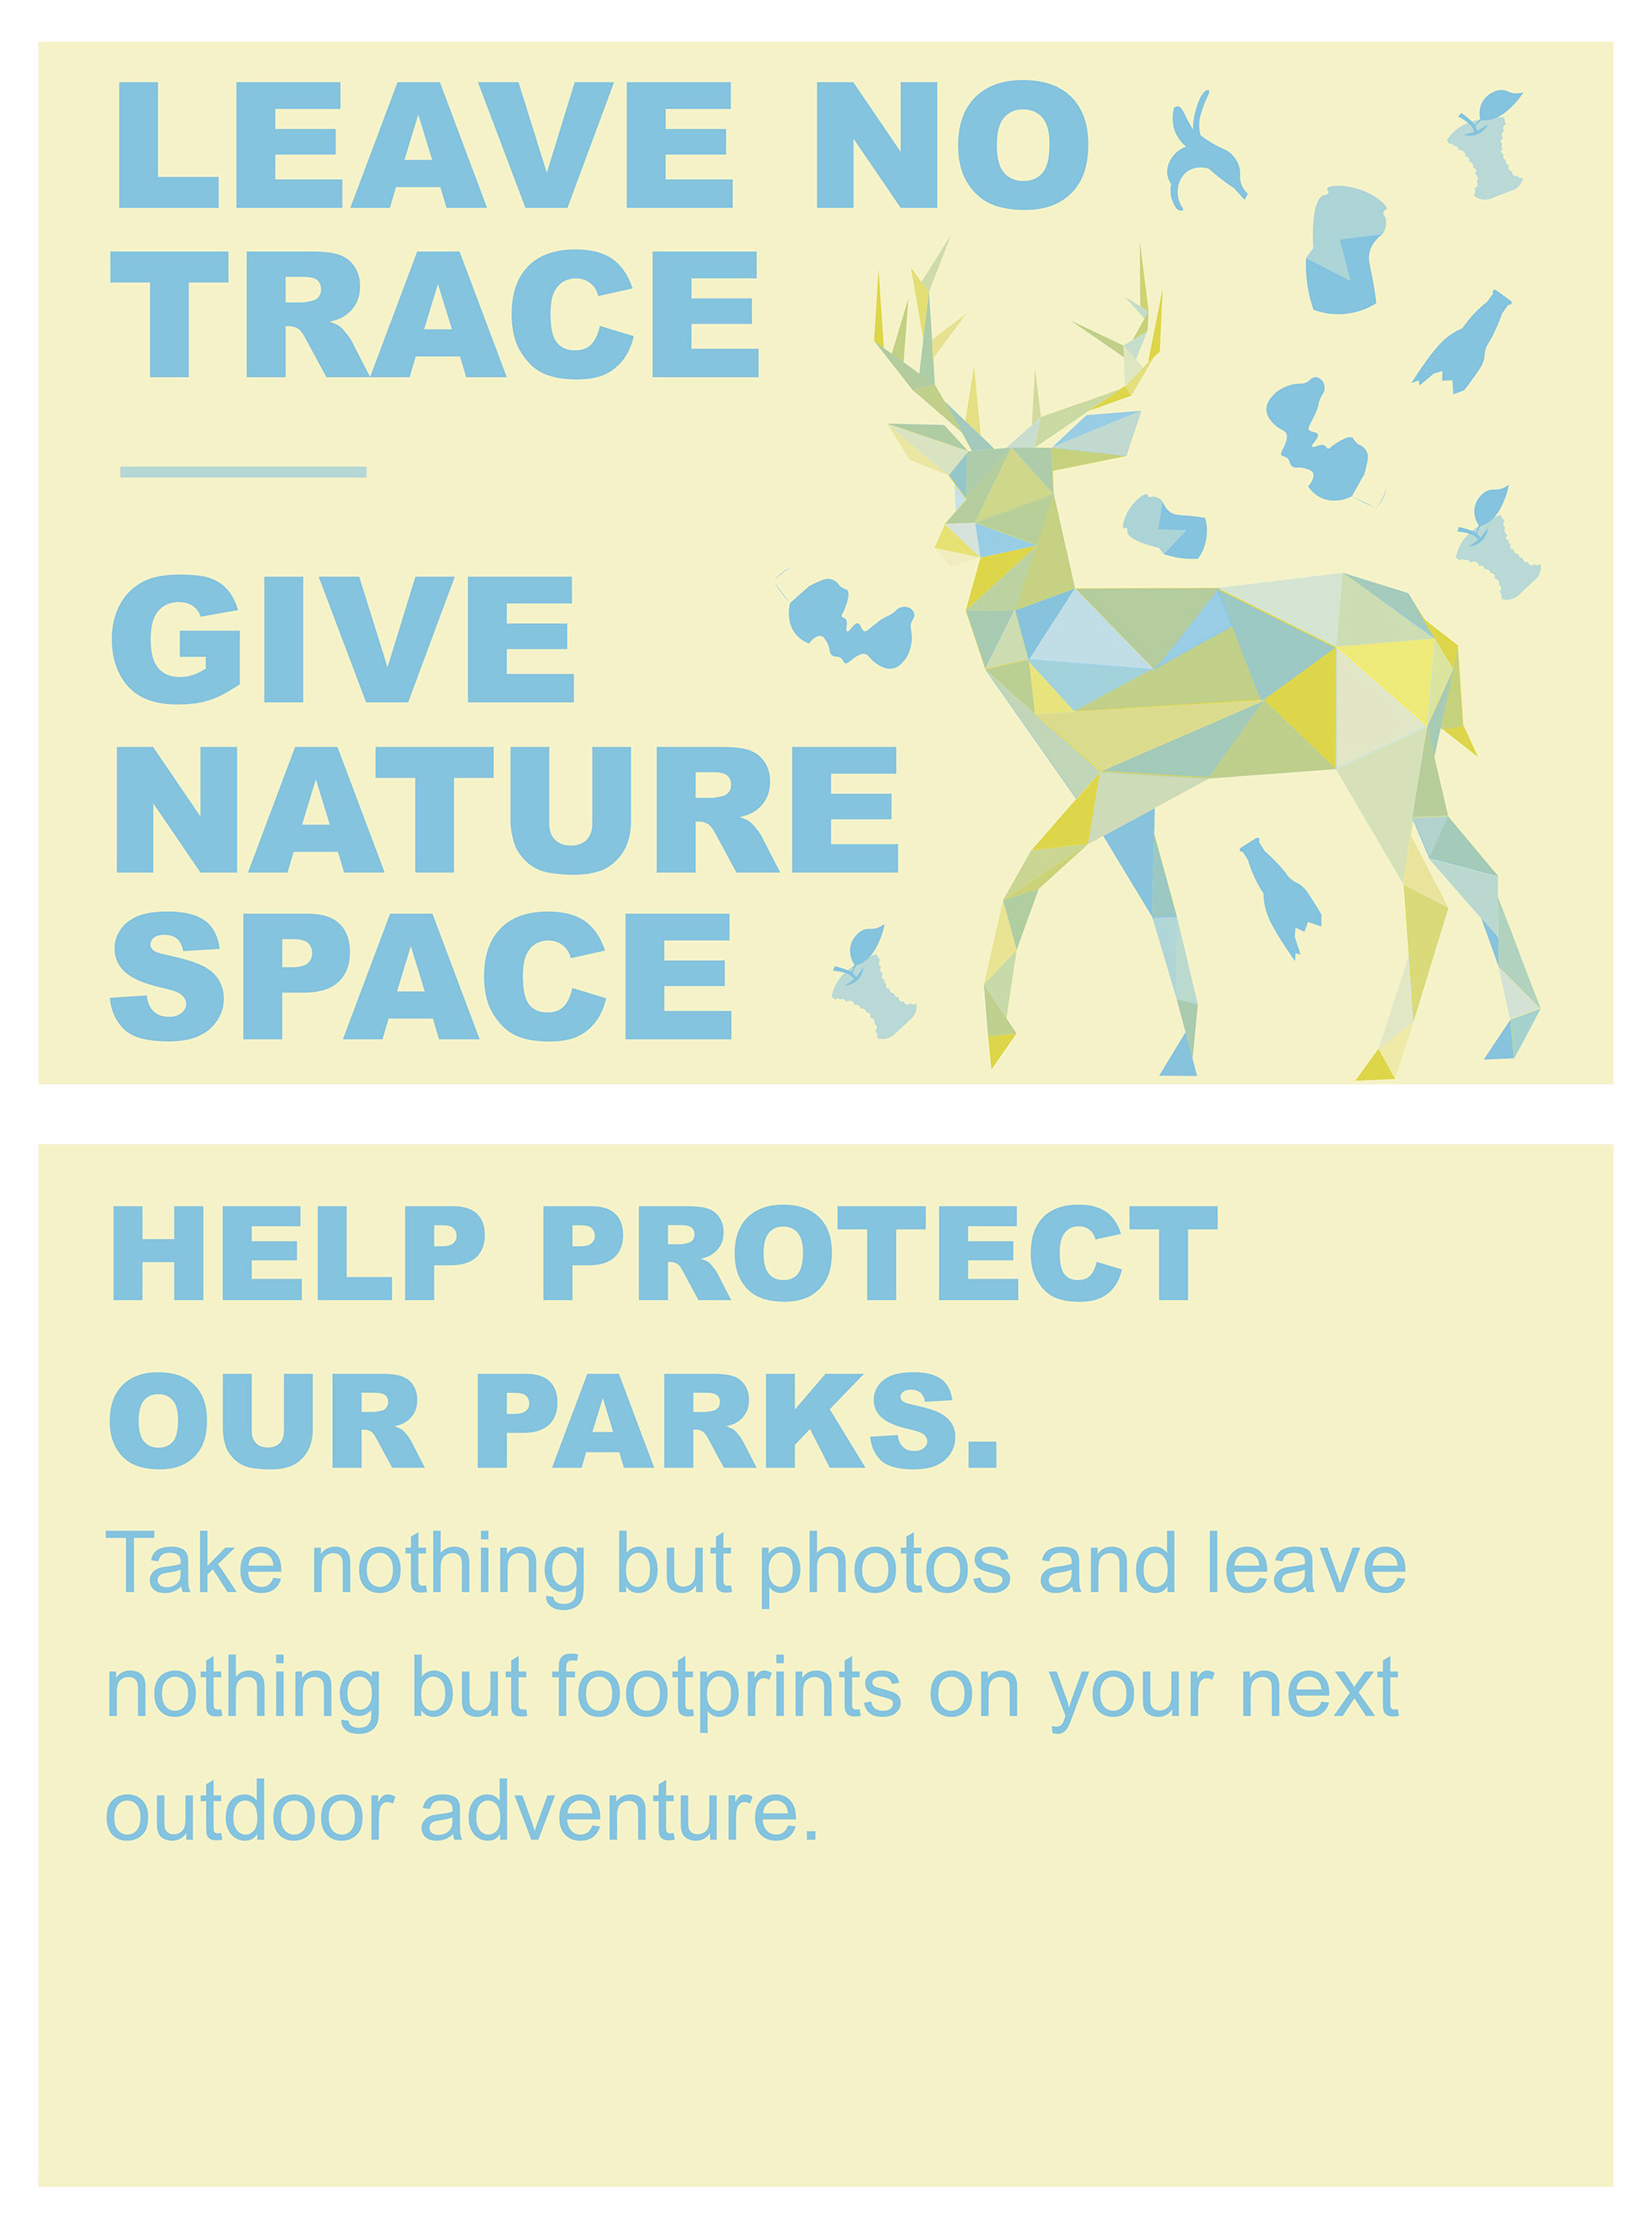 Elise Cameron - Leave No Trace Social Issue Campaign